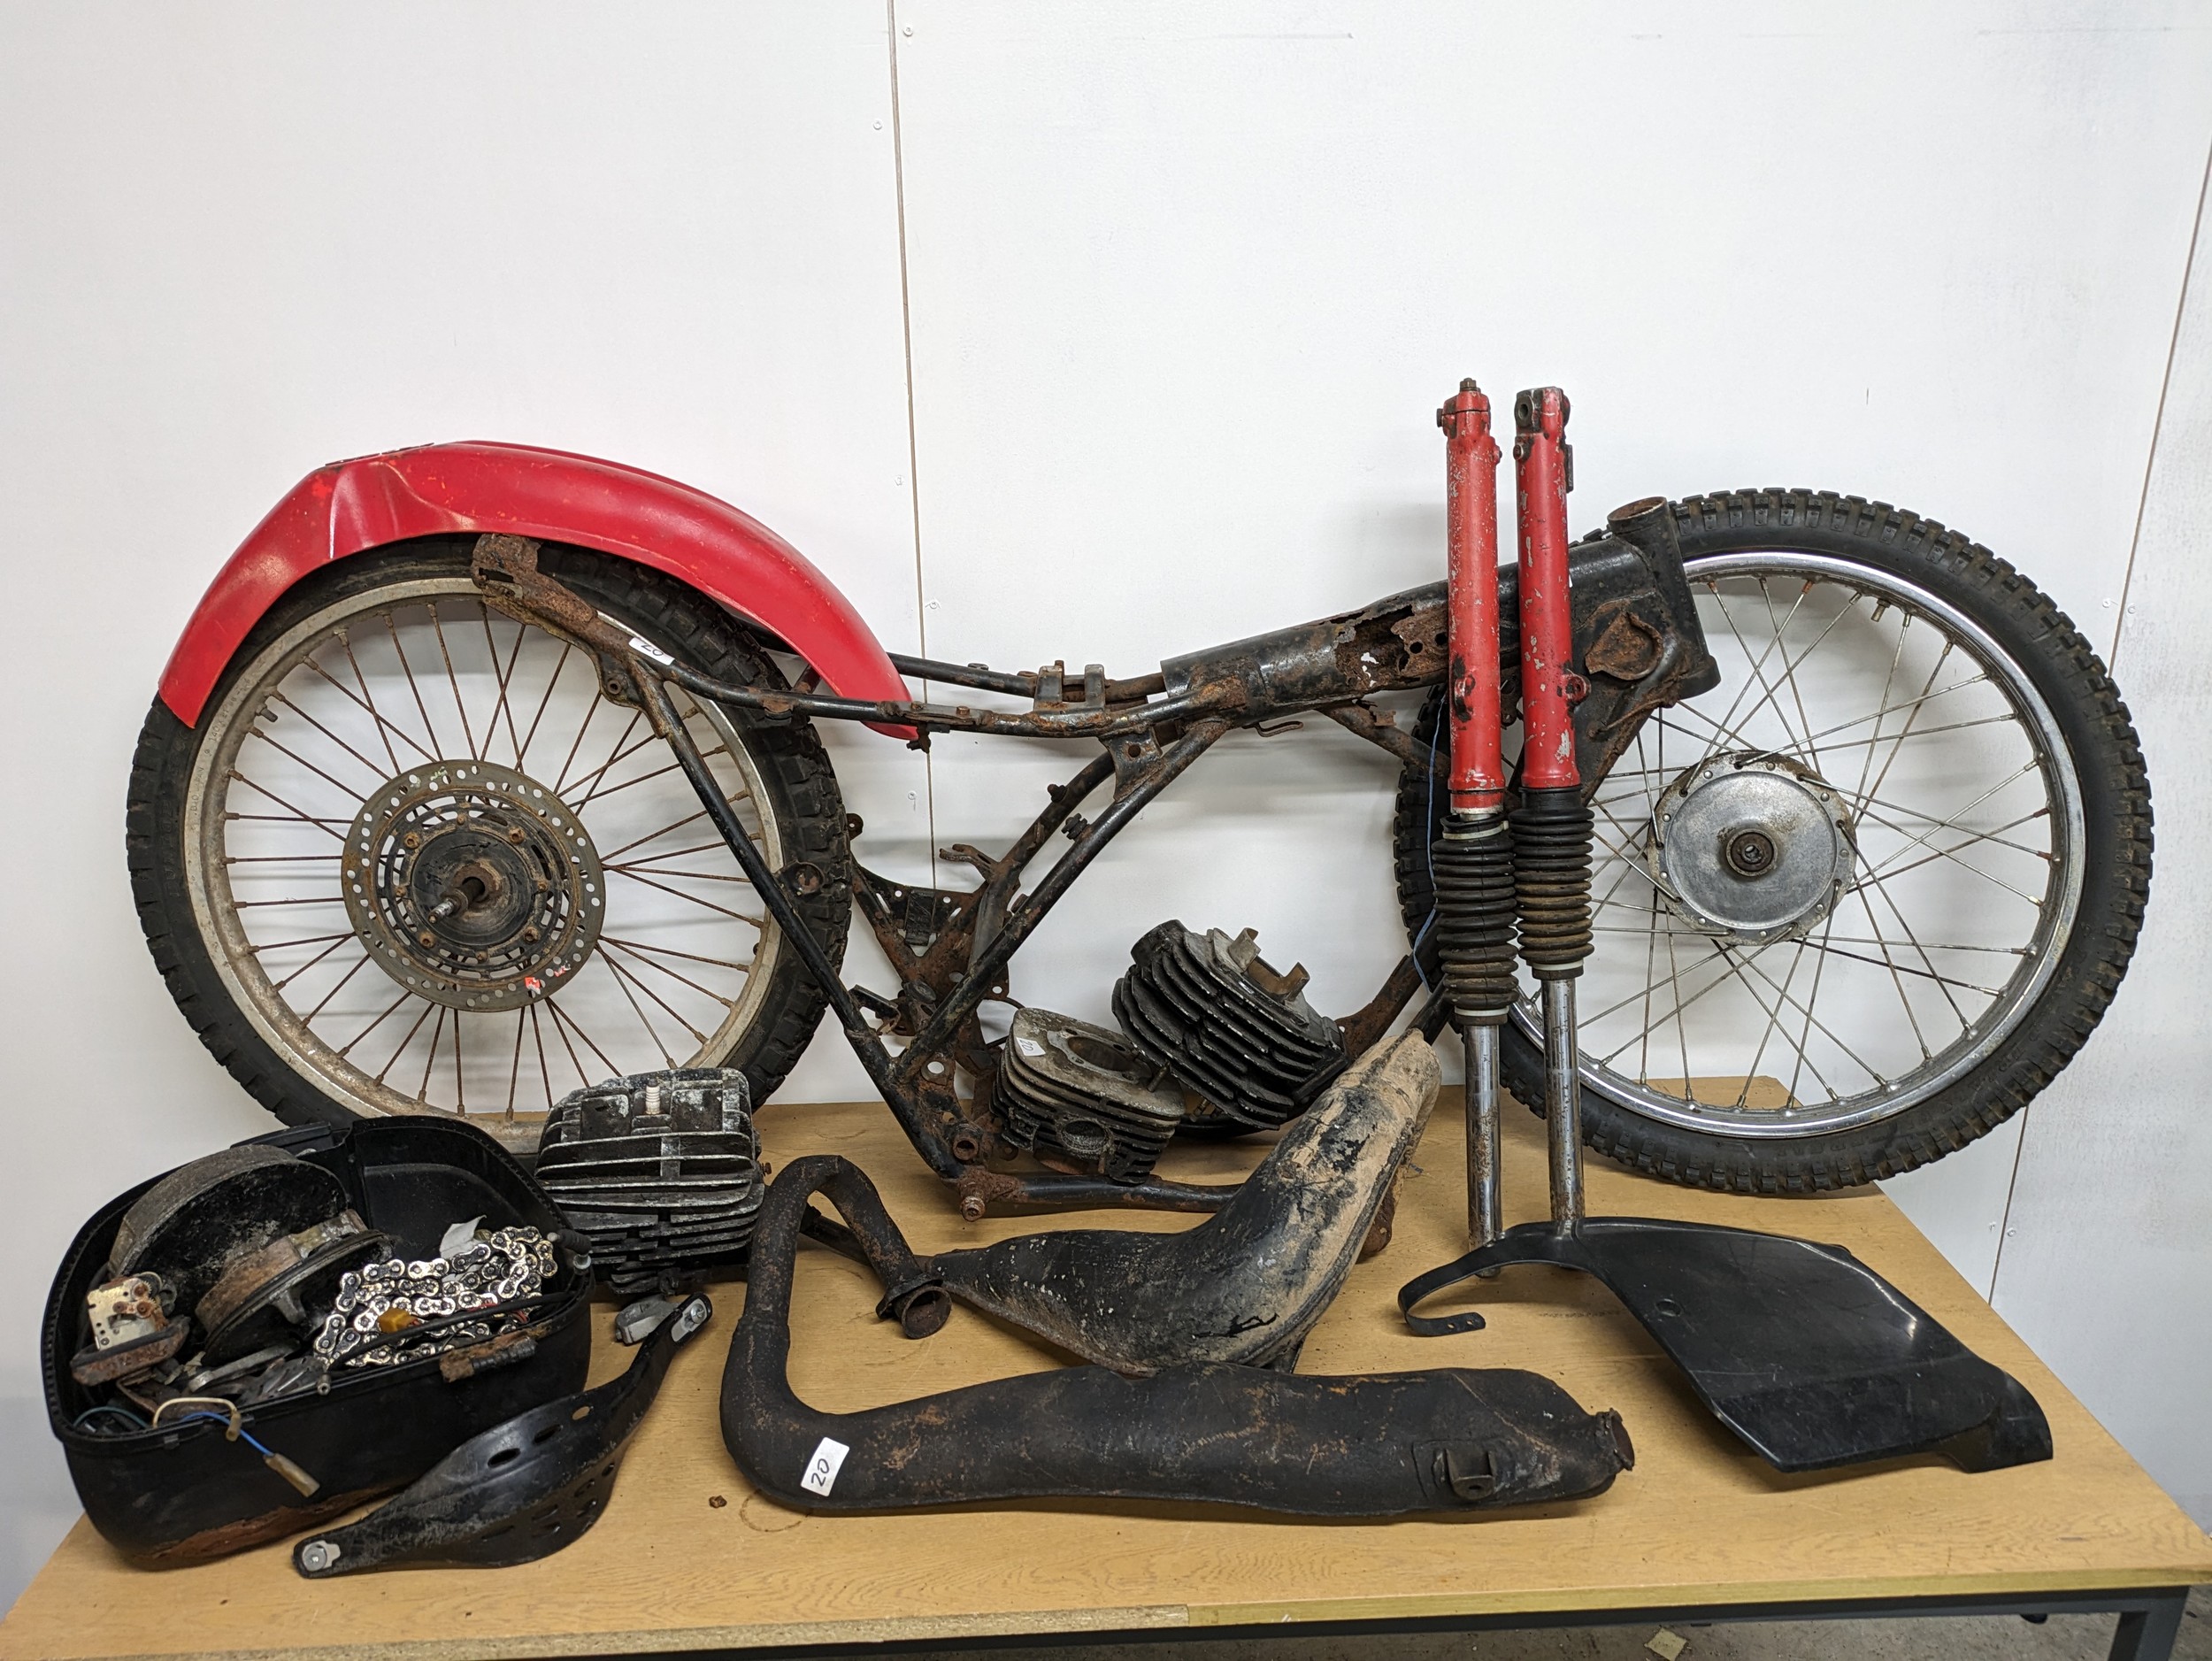 A Yamaha DT250 frame with parts and documents